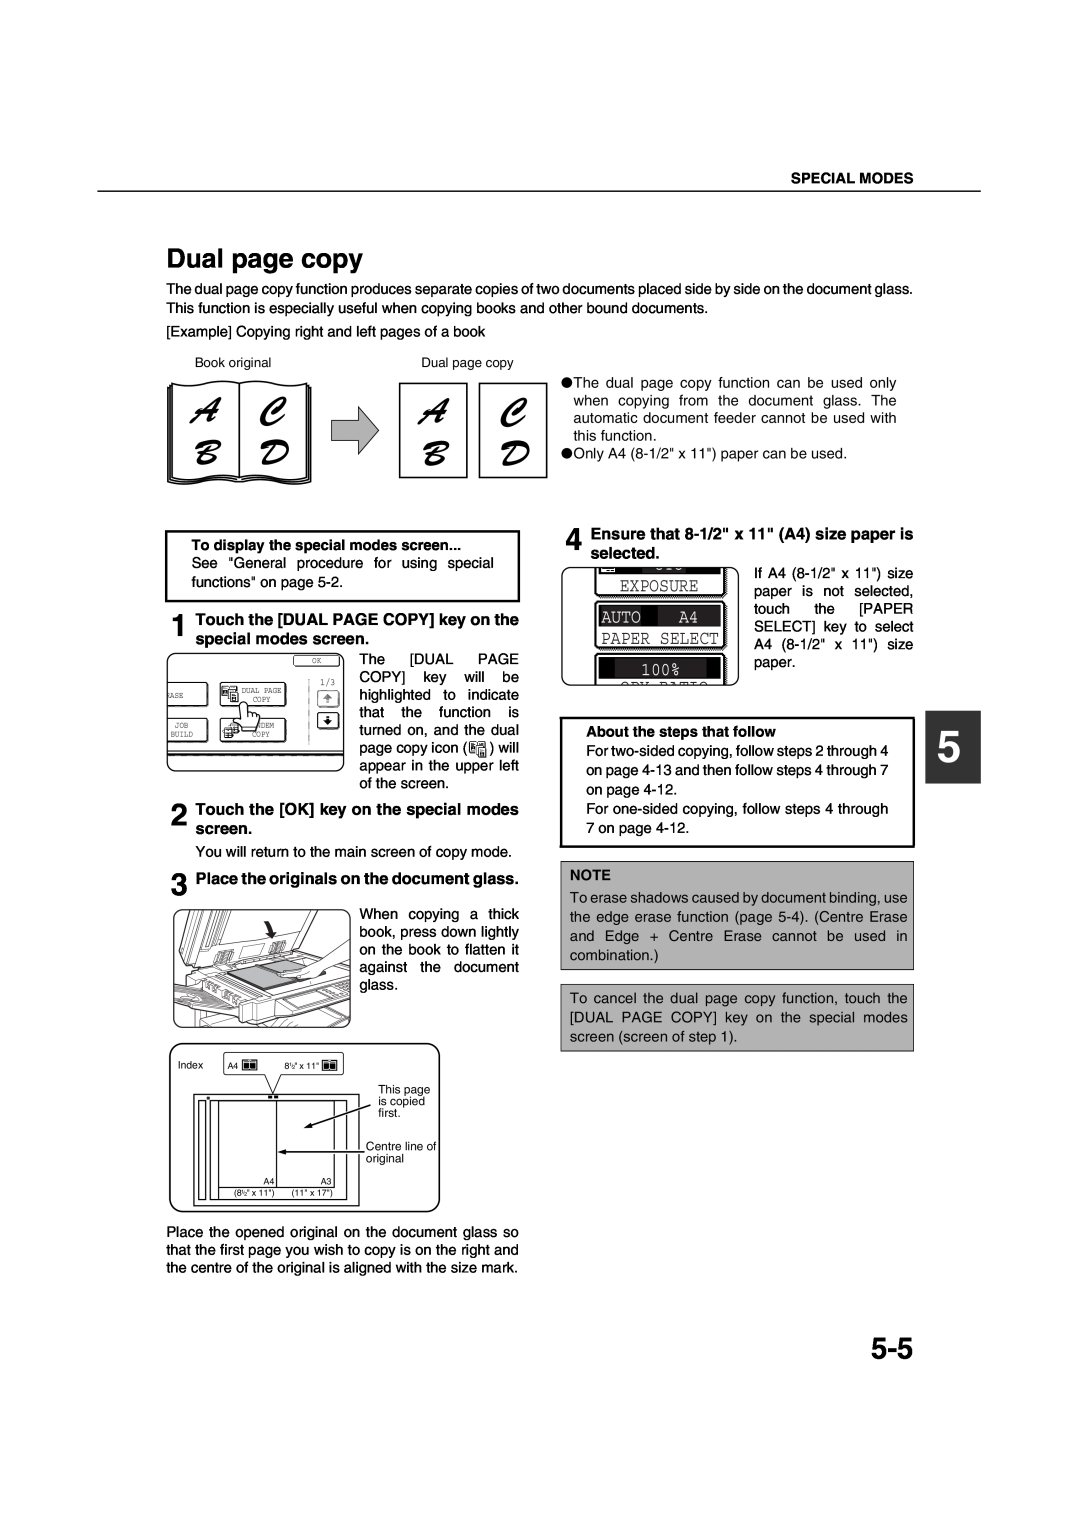 Sharp AR-M451N Dual page copy, Ensure that 8-1/2 x 11 A4 size paper is selected, Place the originals on the document glass 